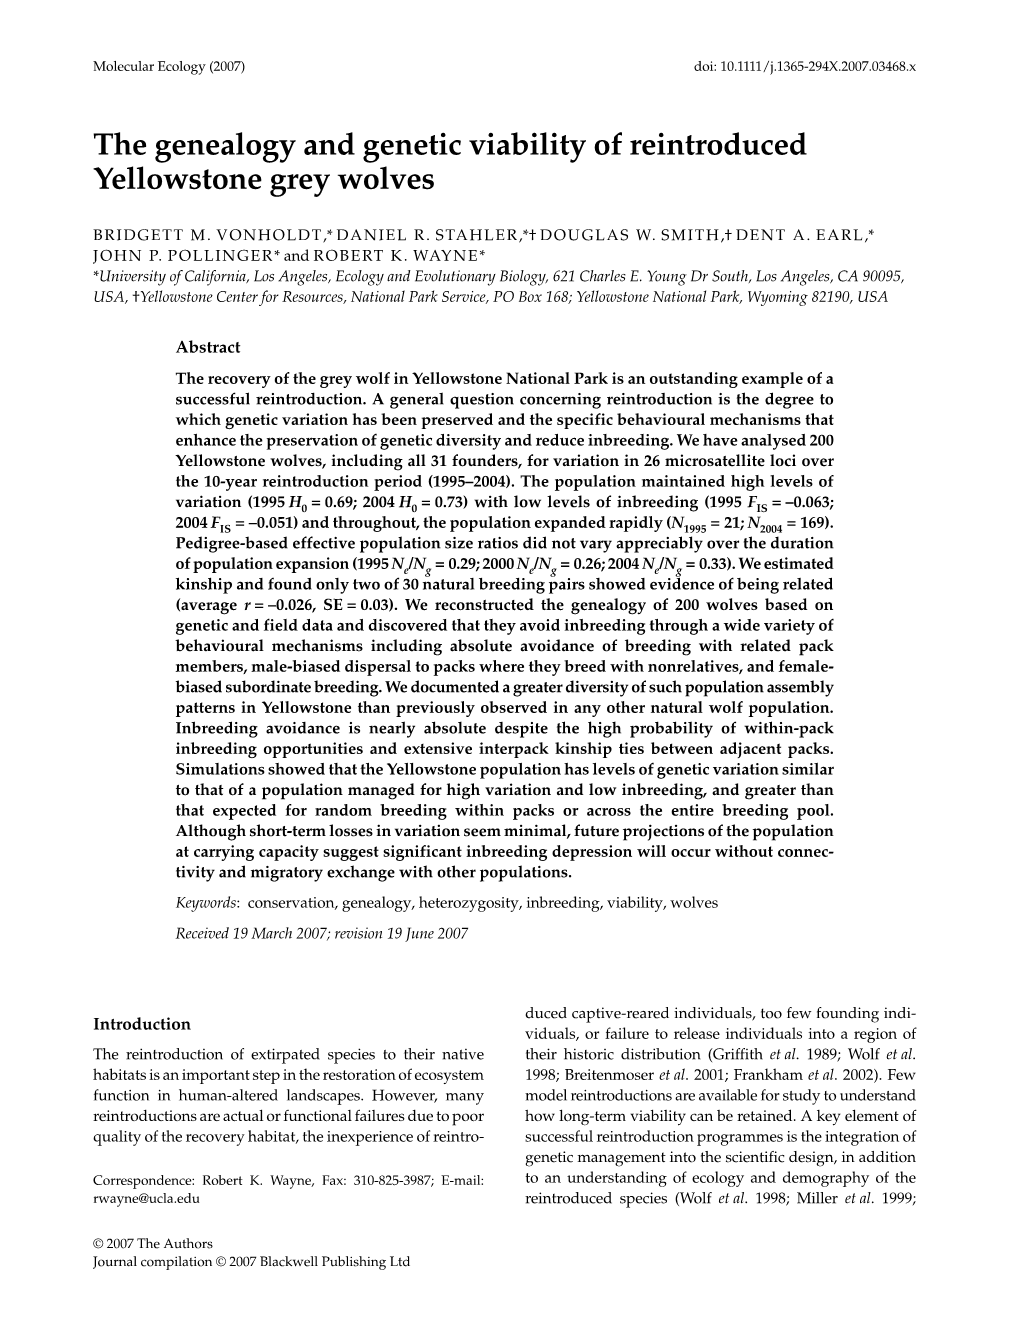 The Genealogy and Genetic Viability of Reintroduced Yellowstone Grey Wolves